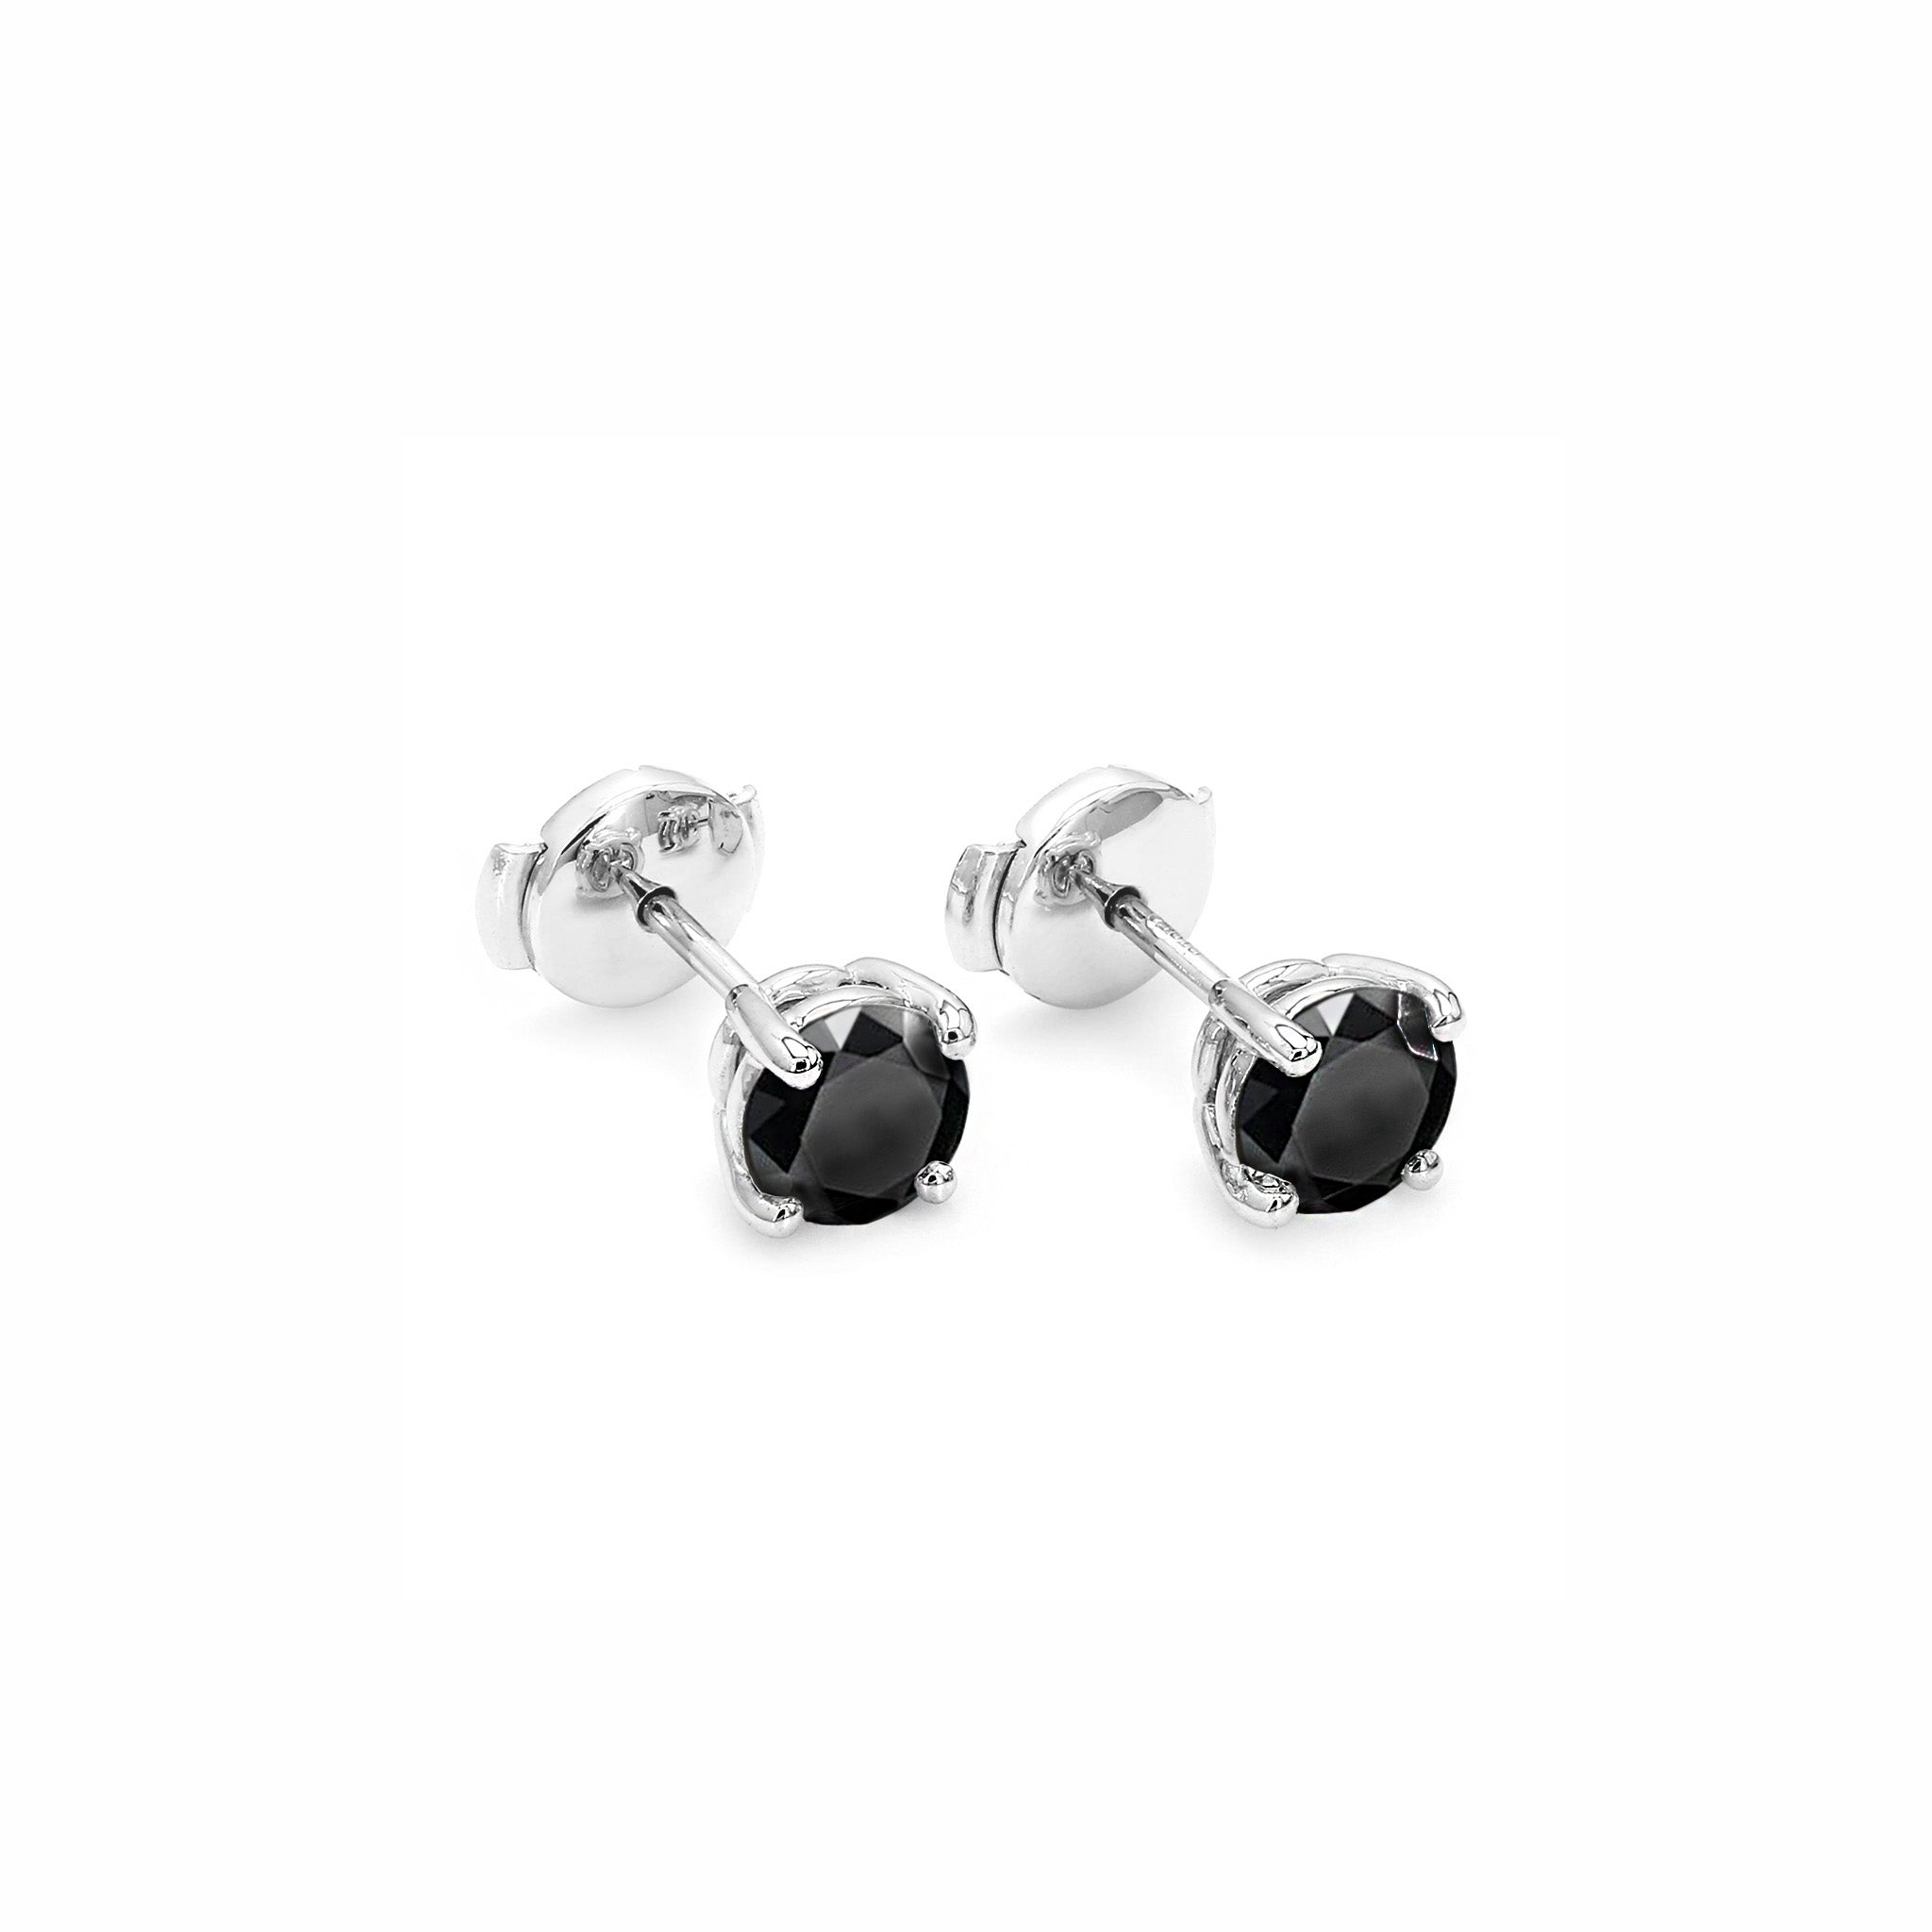 Black Diamond Solitaire Earrings 1.00 Carat in 18K White Gold 3D View